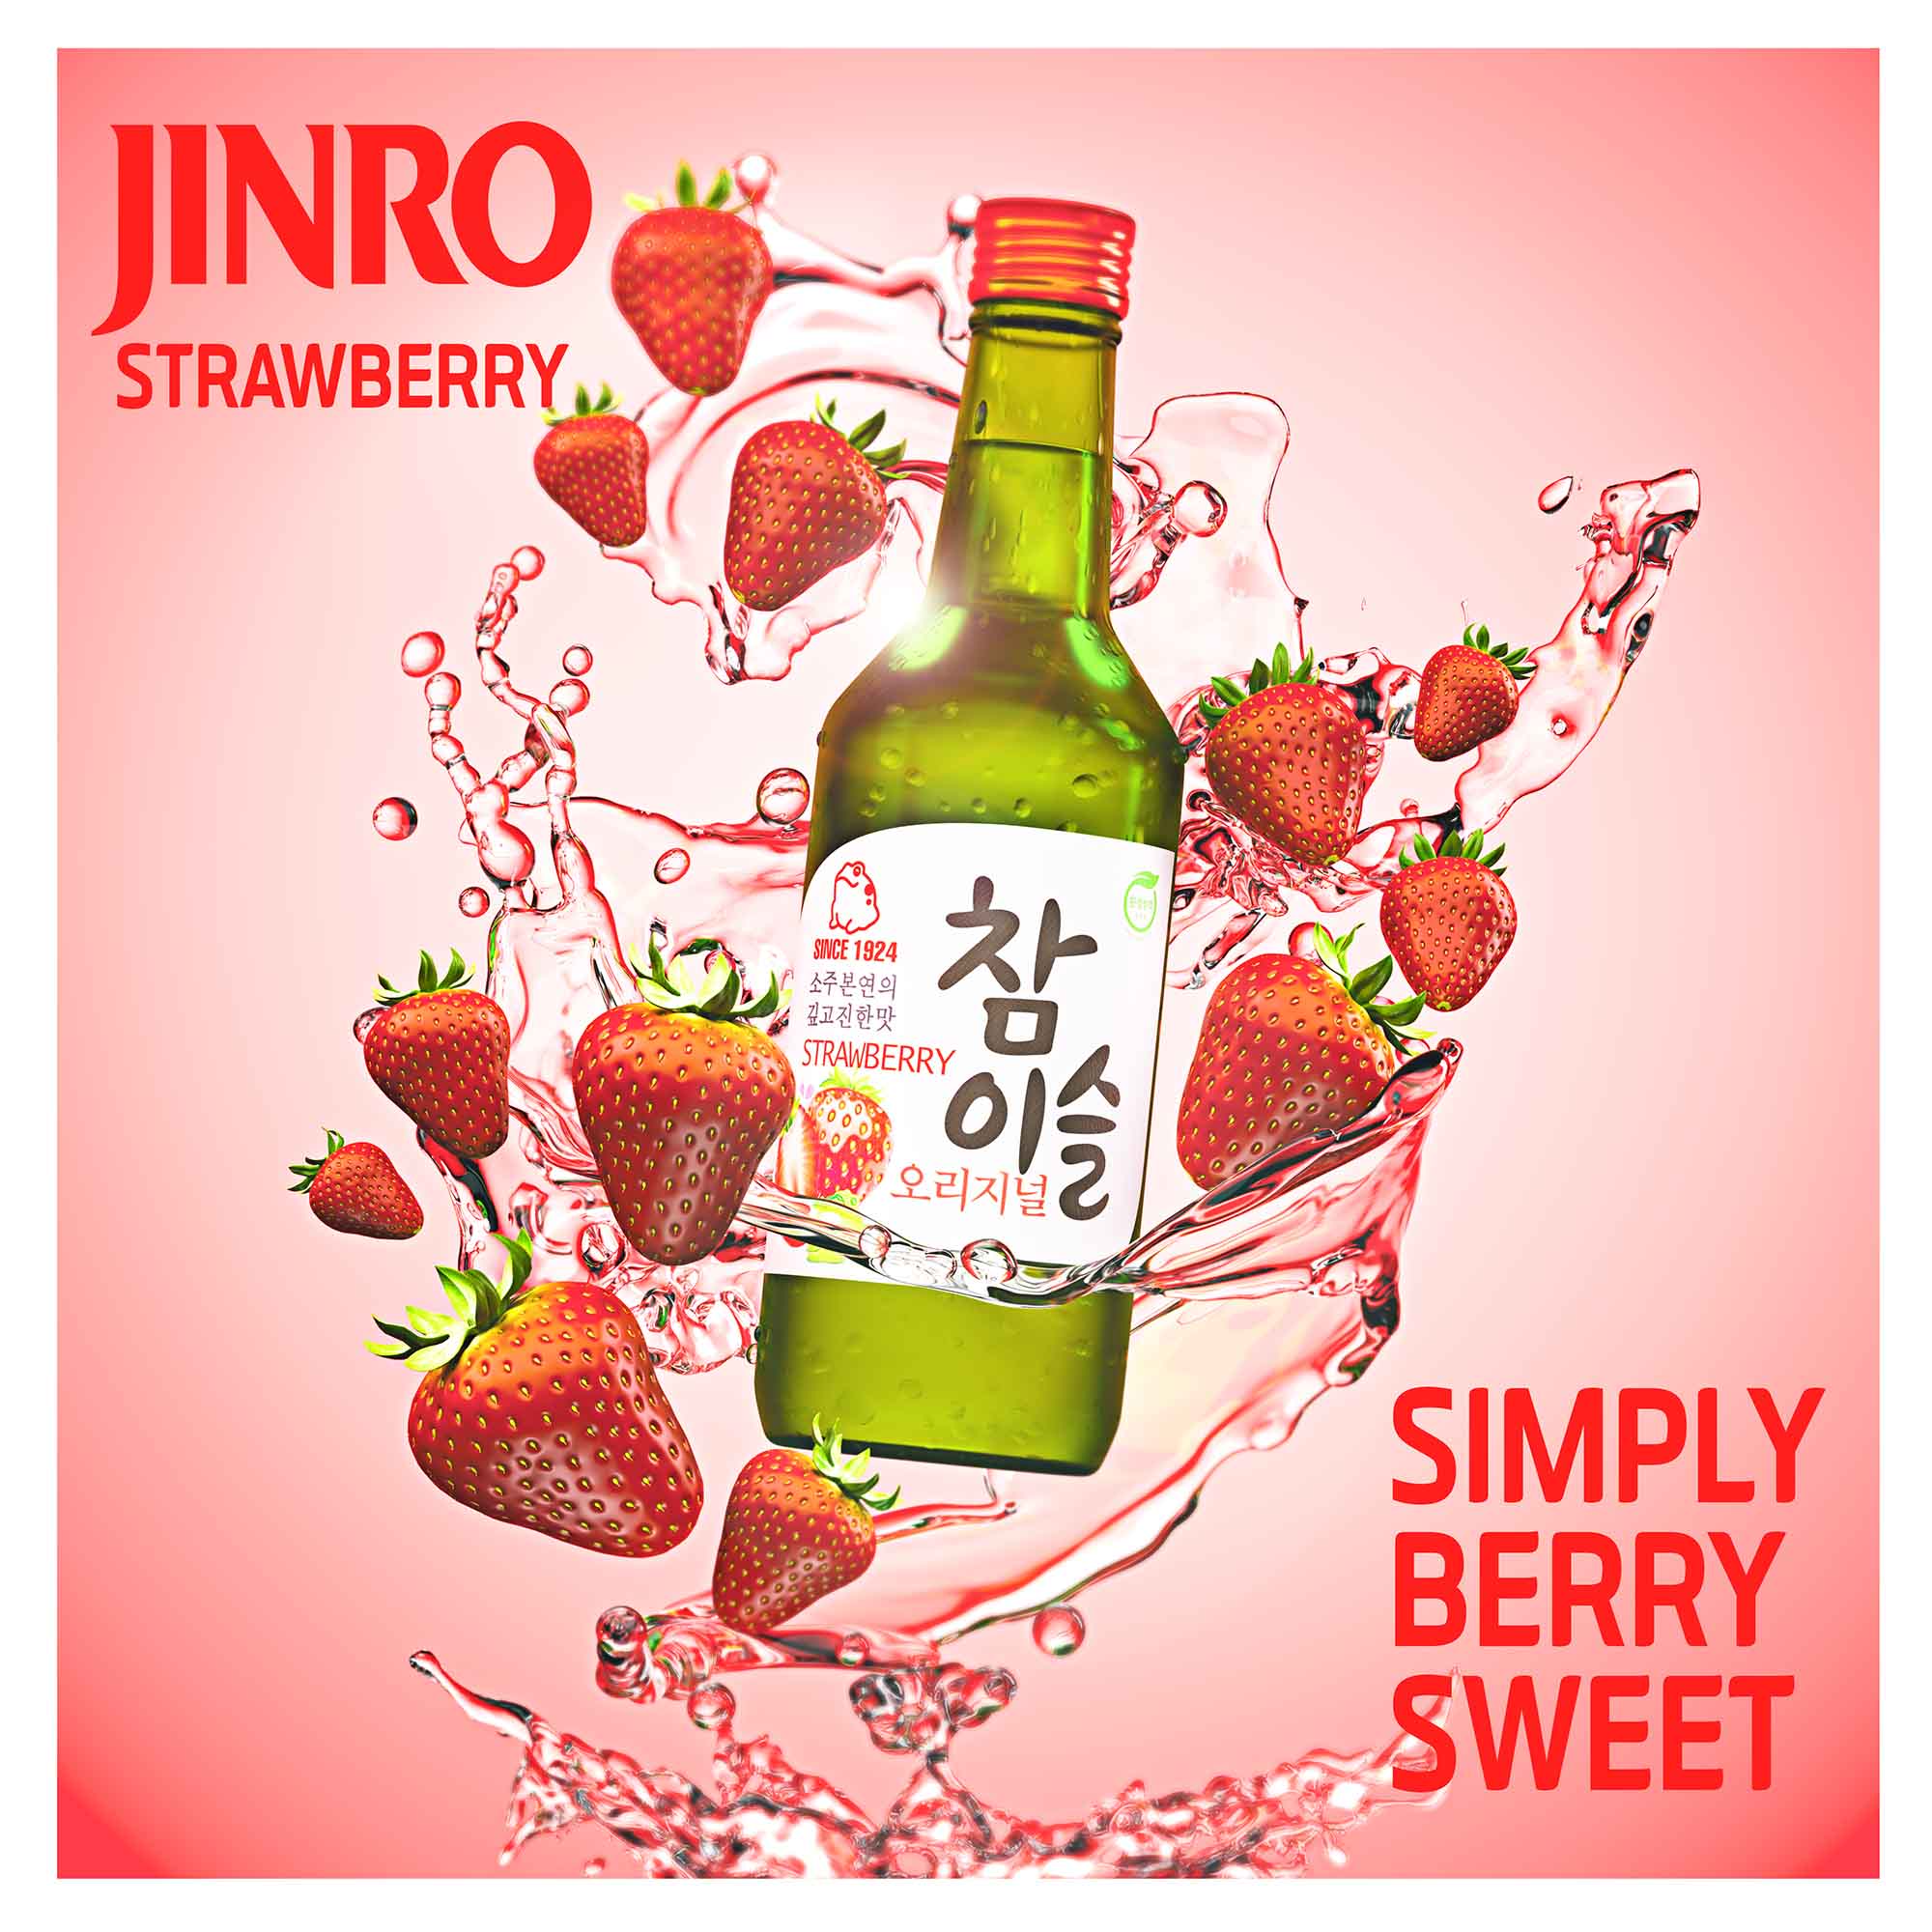 Jinro Strawberry Simply Berry Sweet